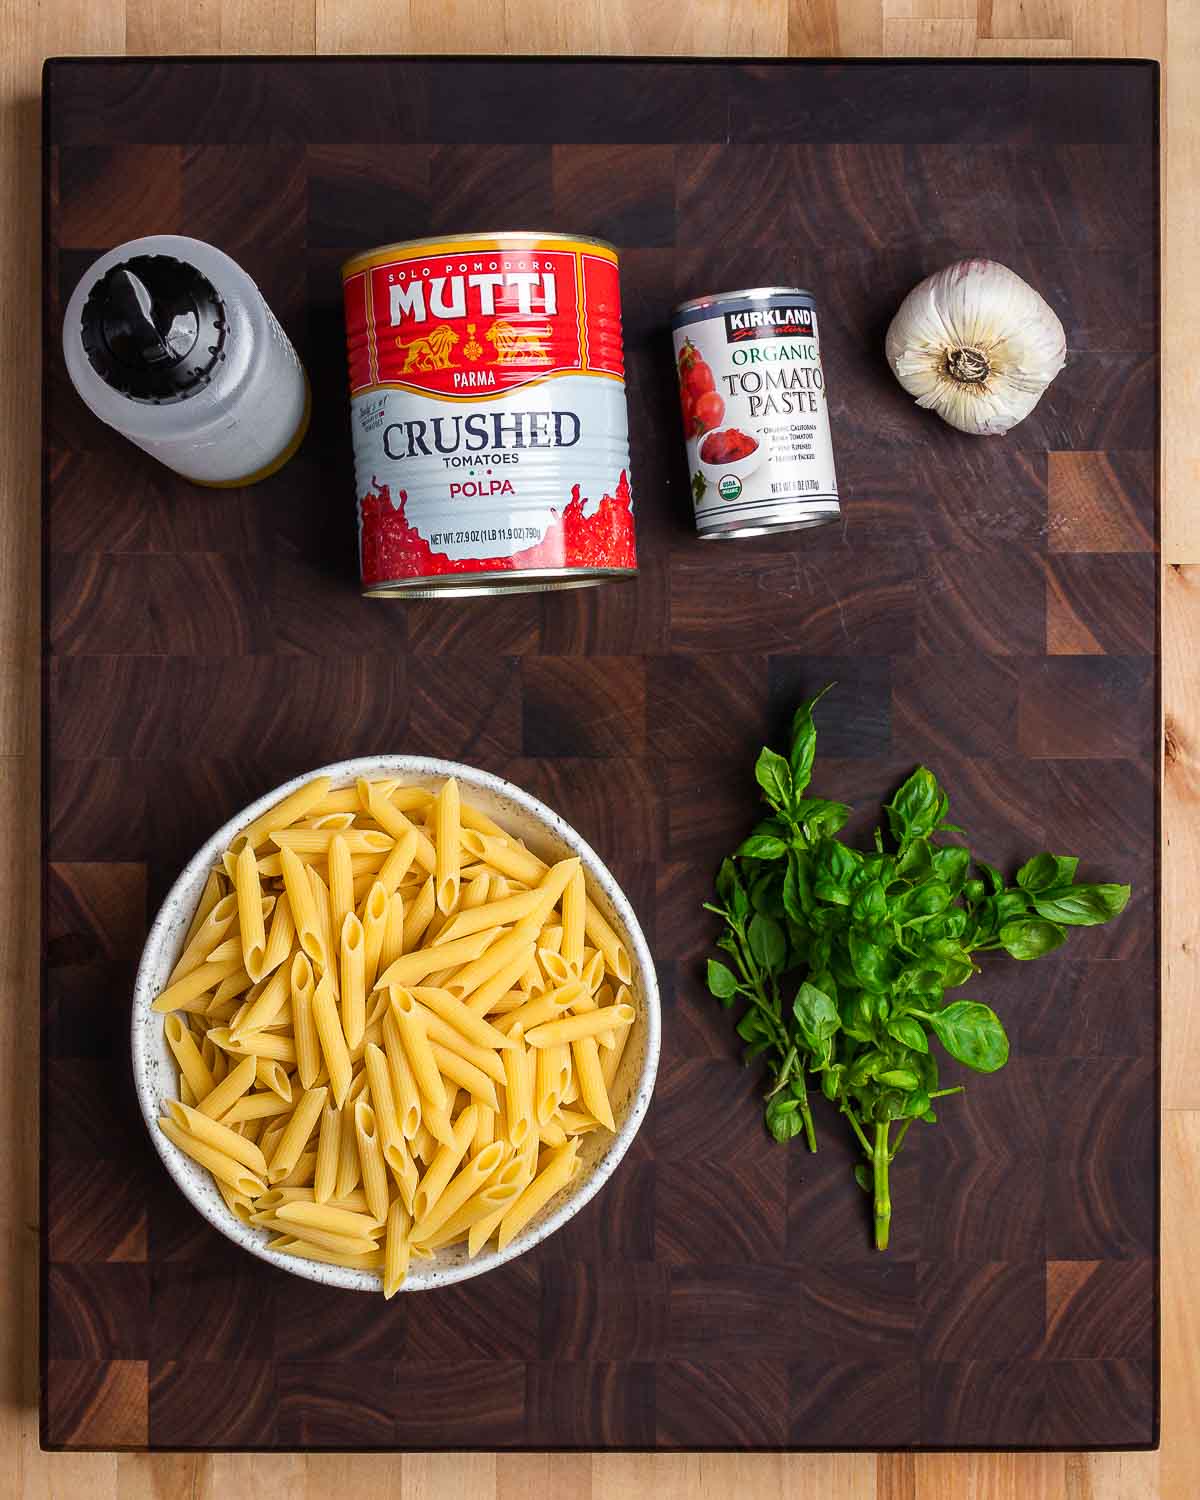 Ingredients shown: olive oil, plum tomatoes, tomato paste, garlic, penne pasta, and basil.